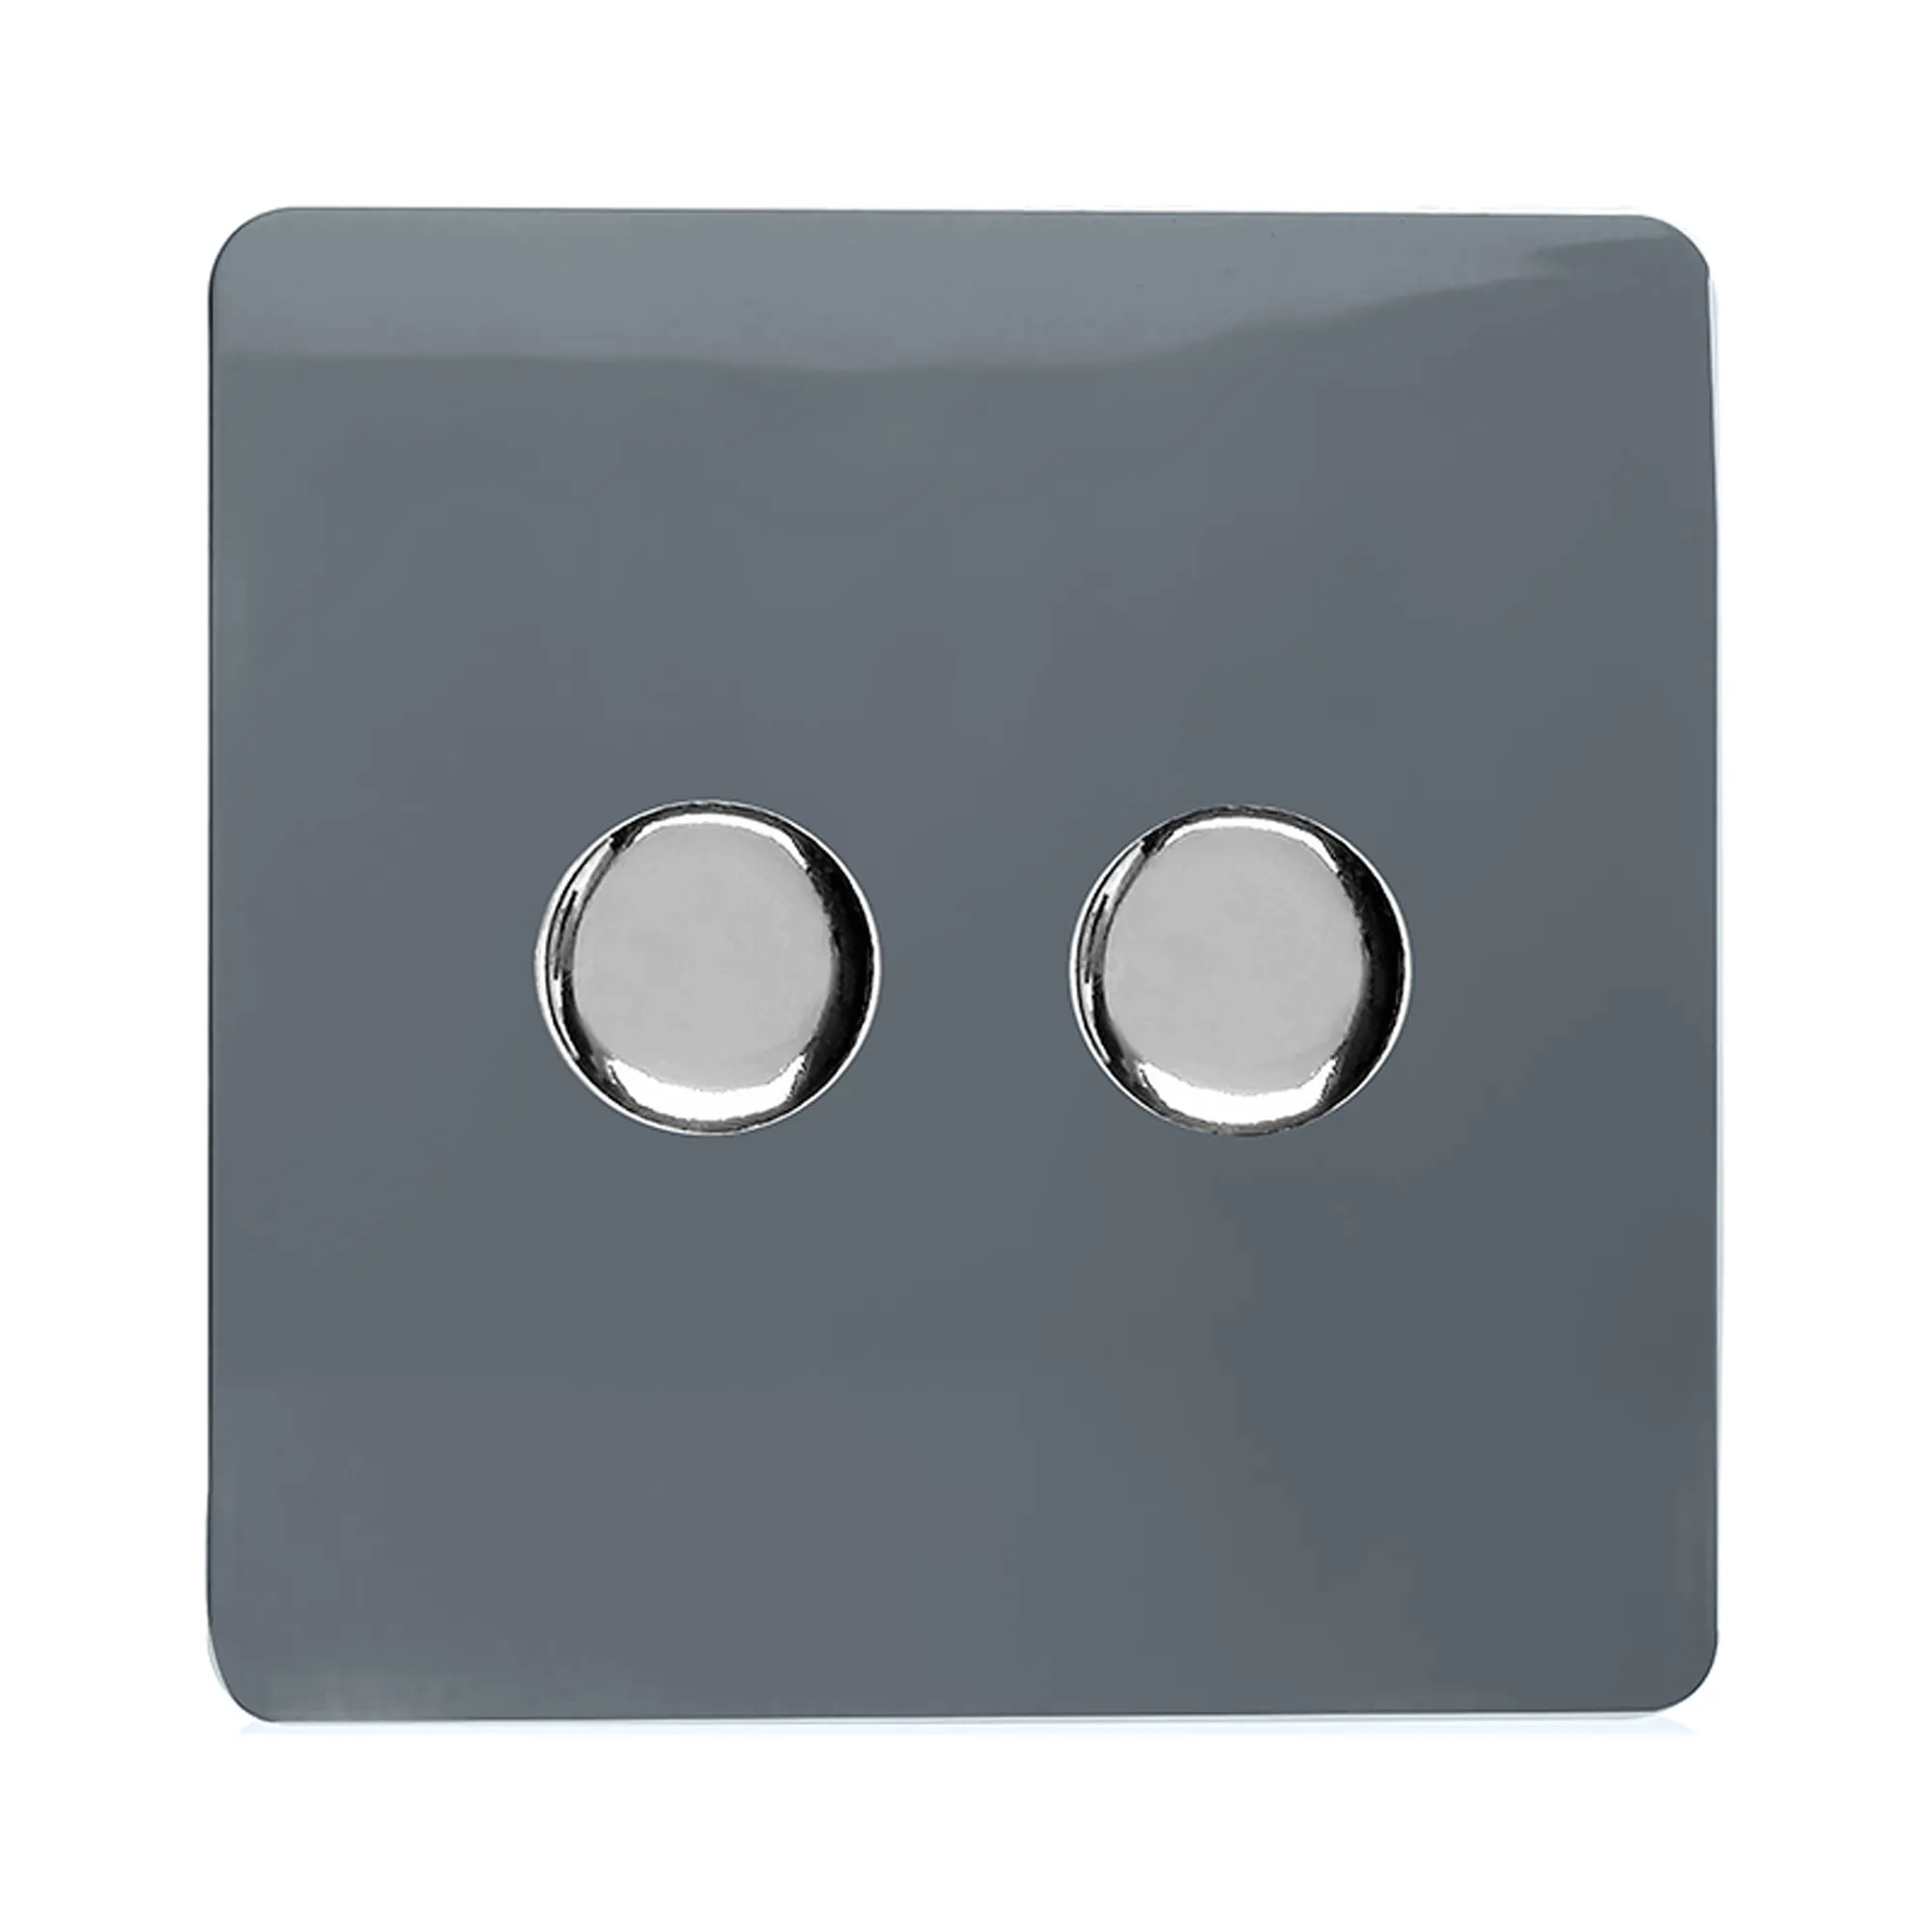 ART-2LDMWG  2 Gang 2 Way LED Dimmer Switch Warm Grey